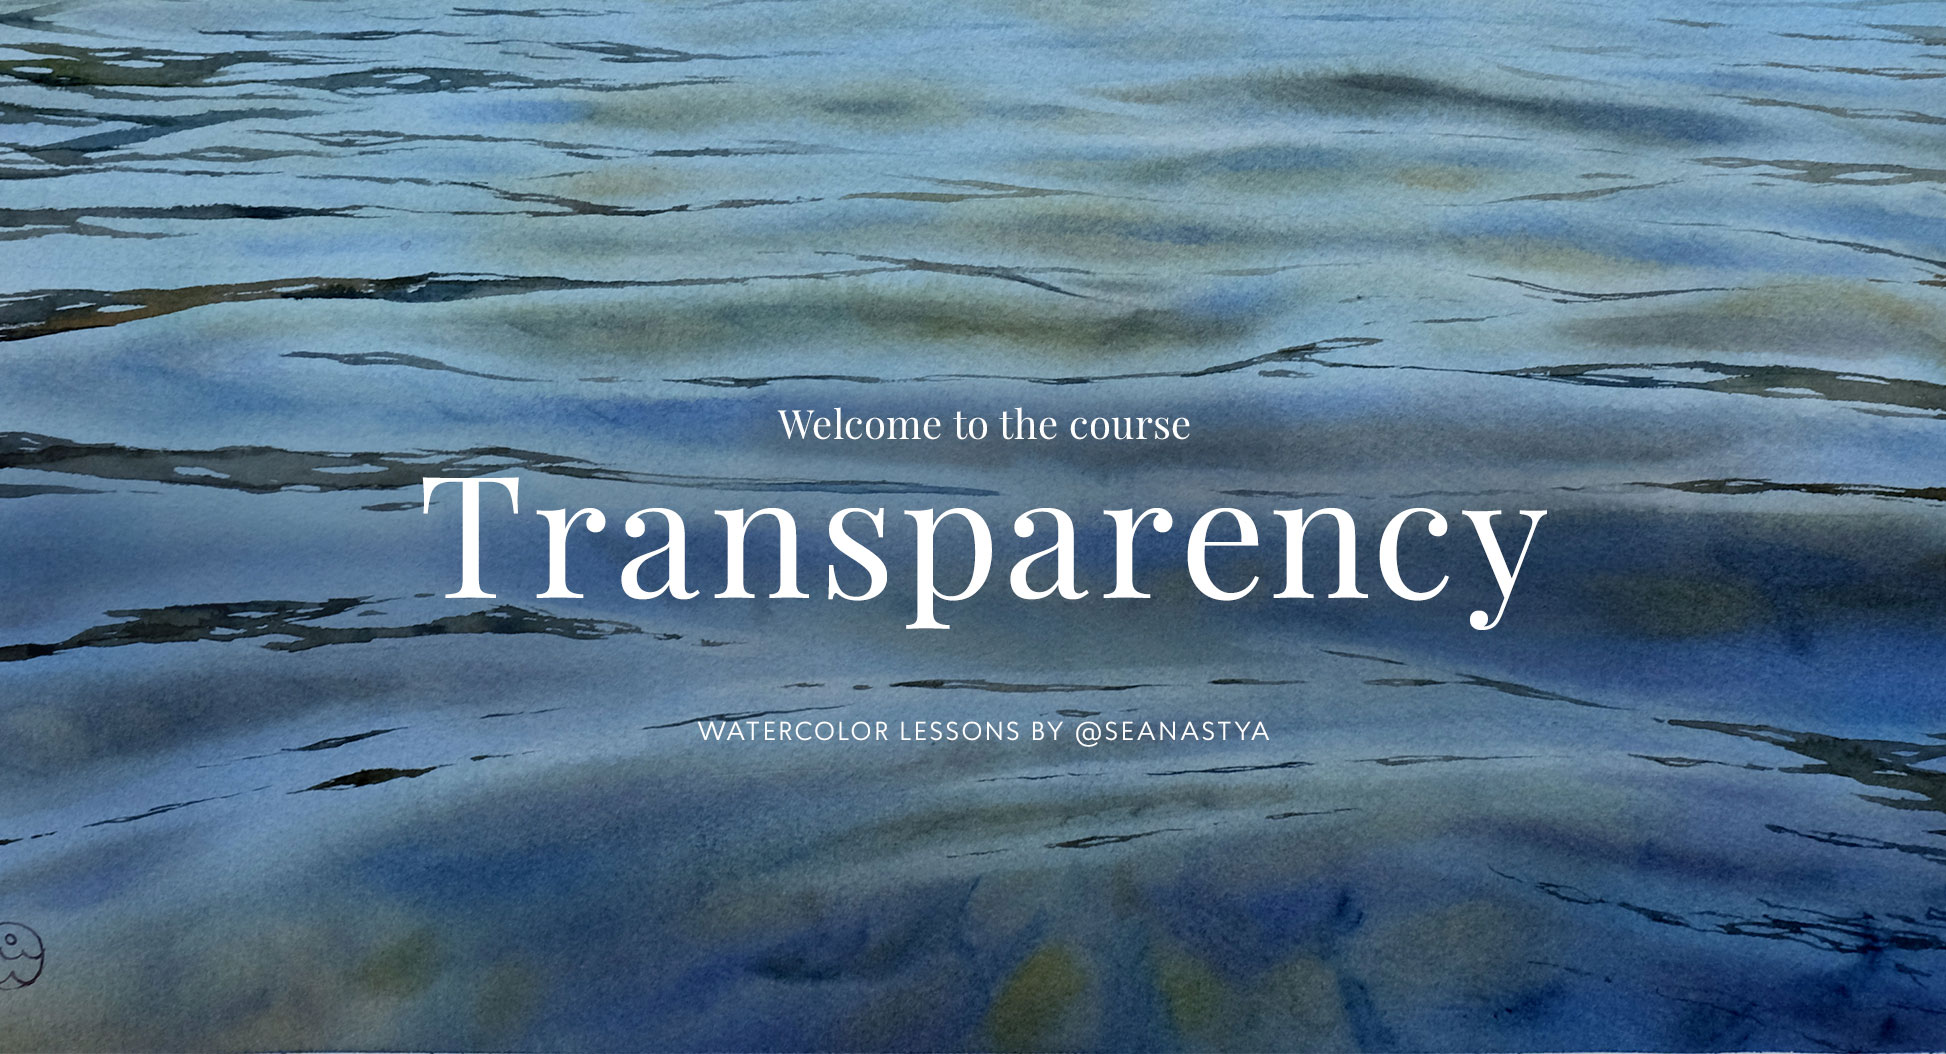 Transparency welcome